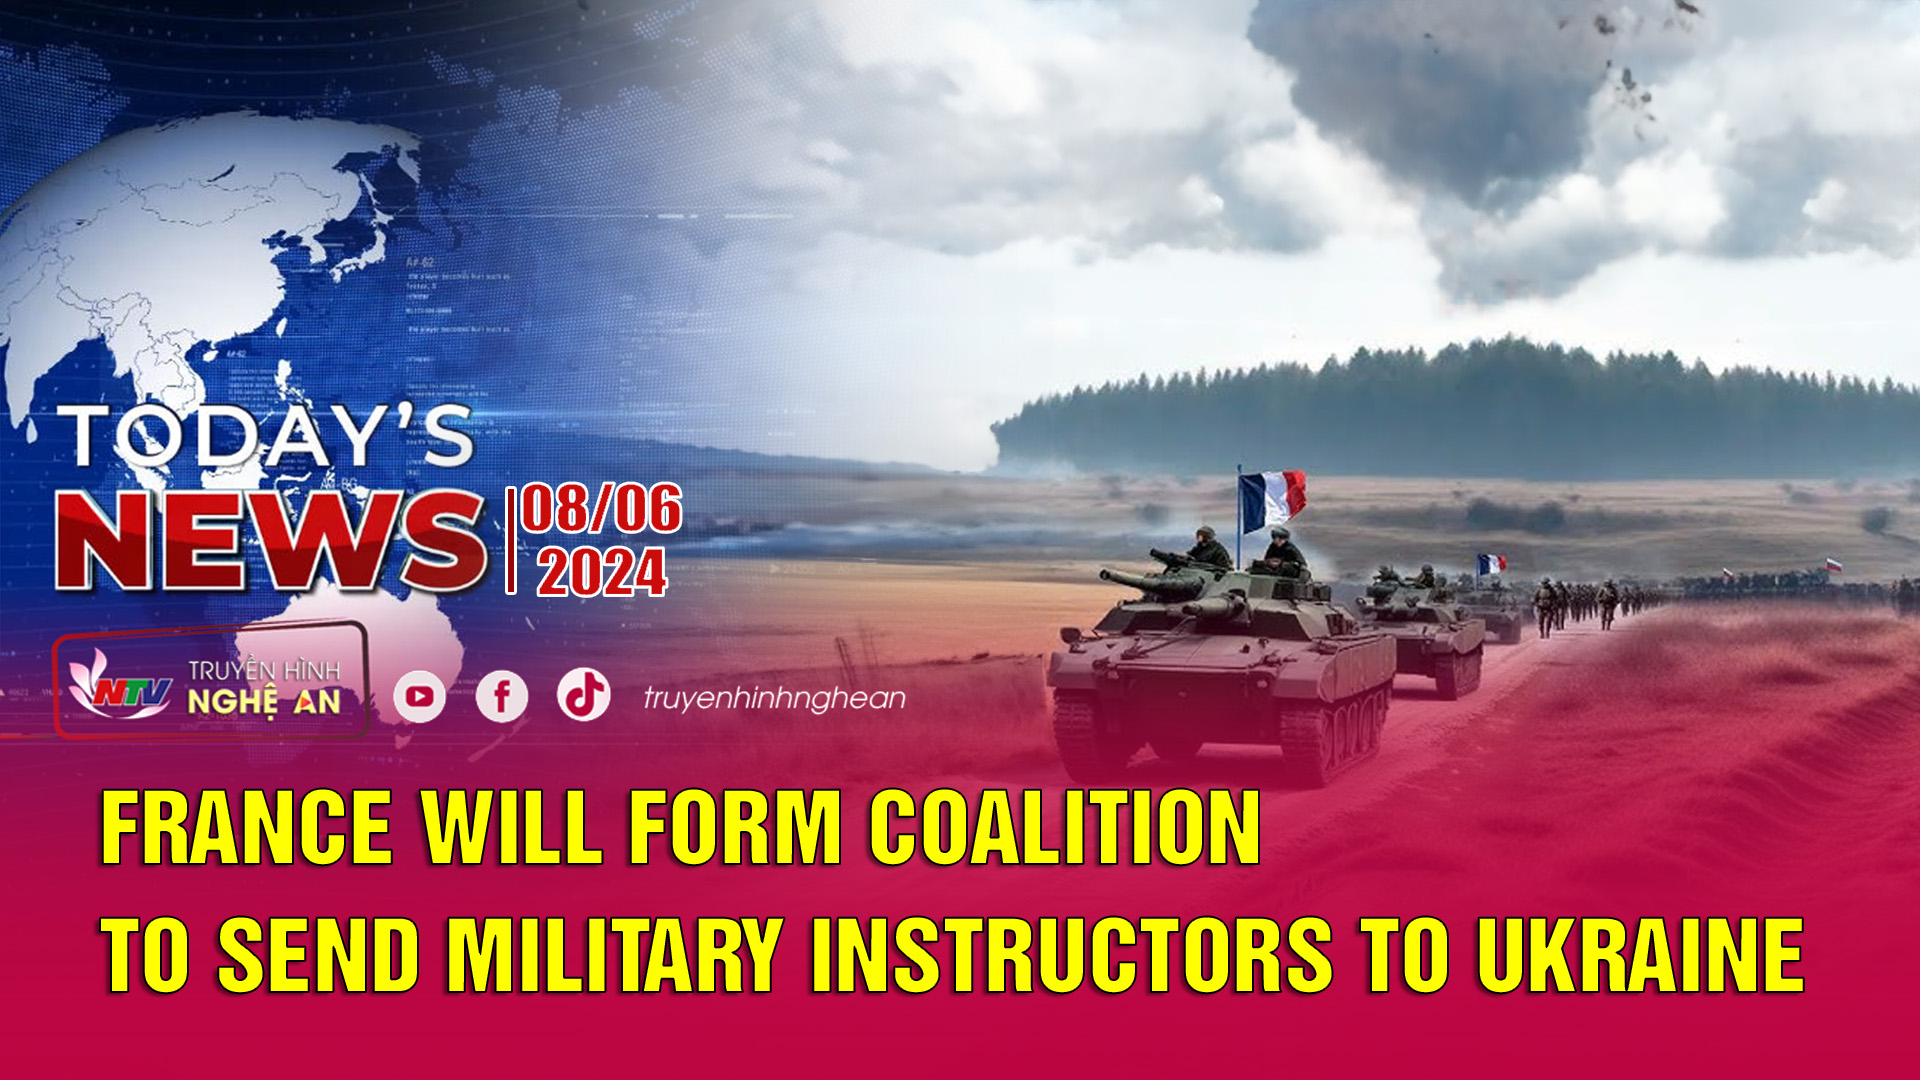 Today's News 08/06/2024: France will form coalition to send military instructors to Ukraine